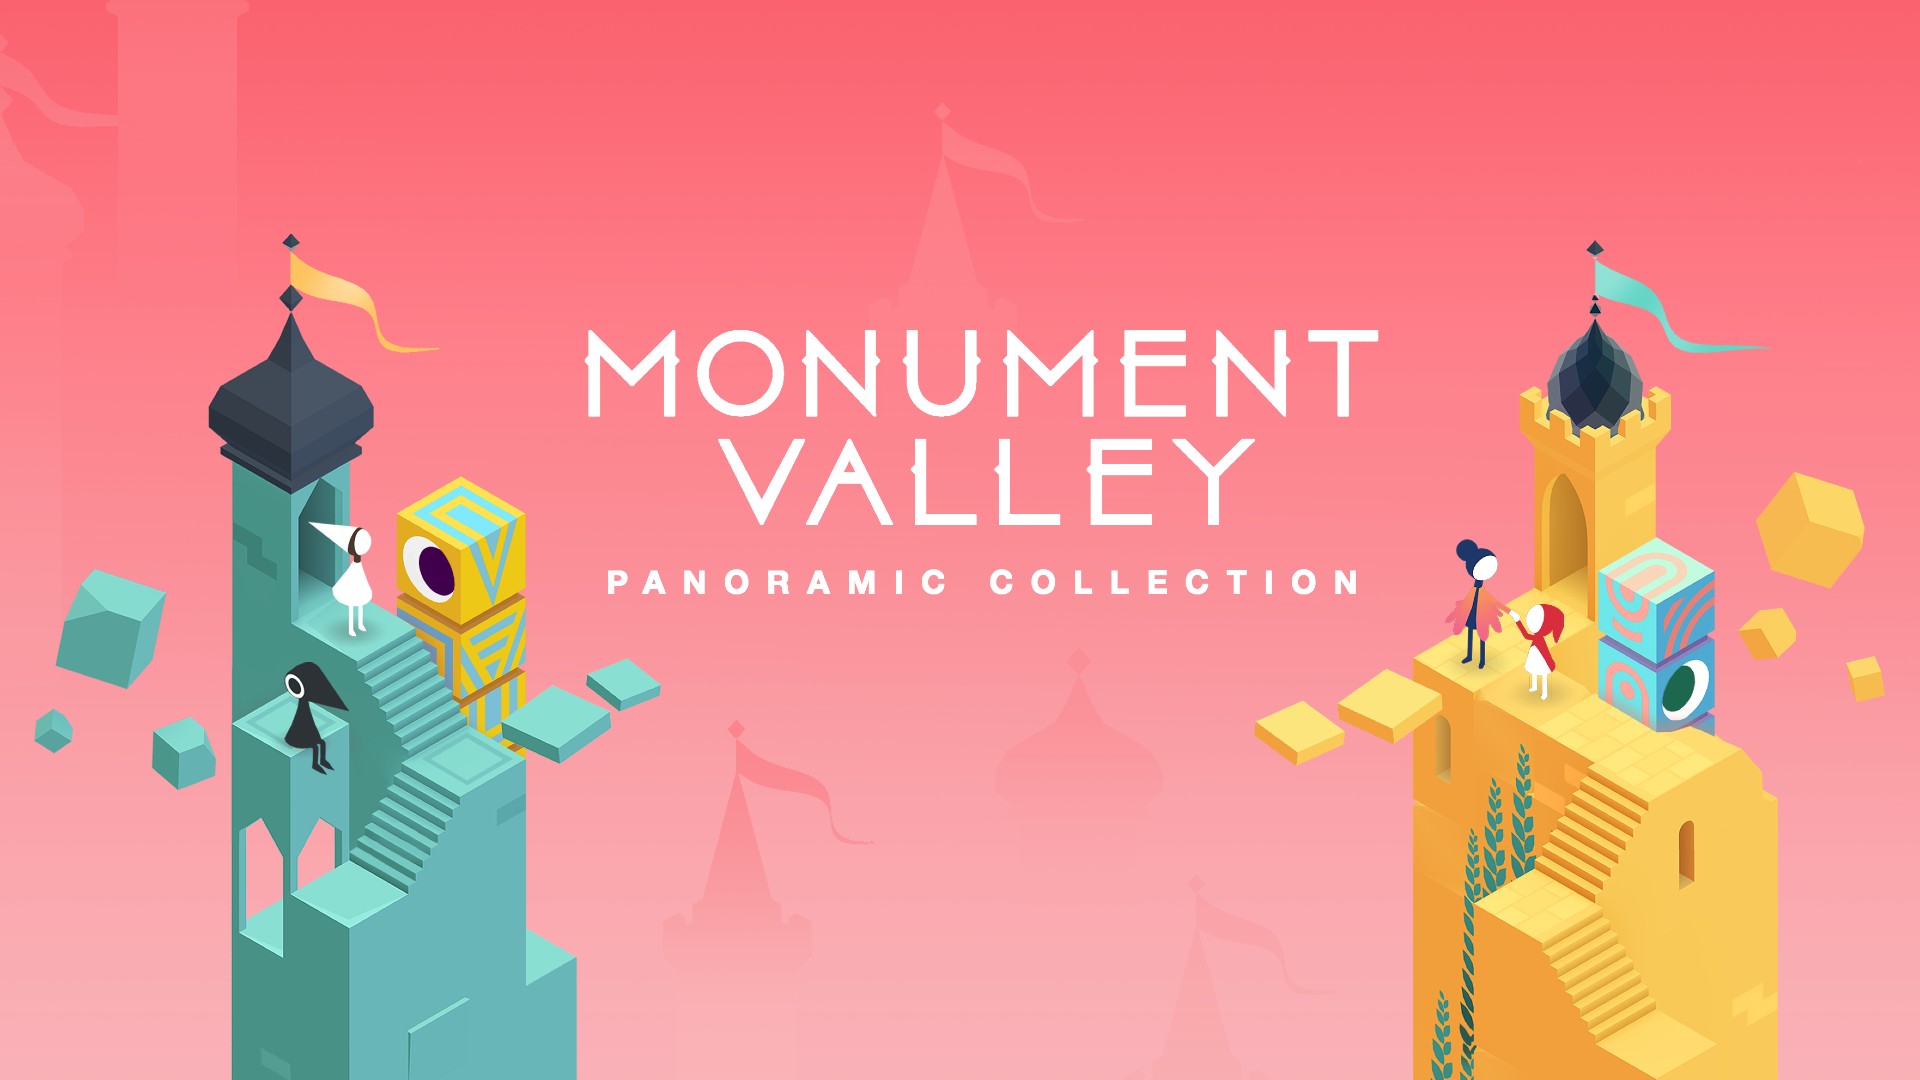 Award Winning Puzzle Game Monument Valley Is Heading To PC In A New Collection